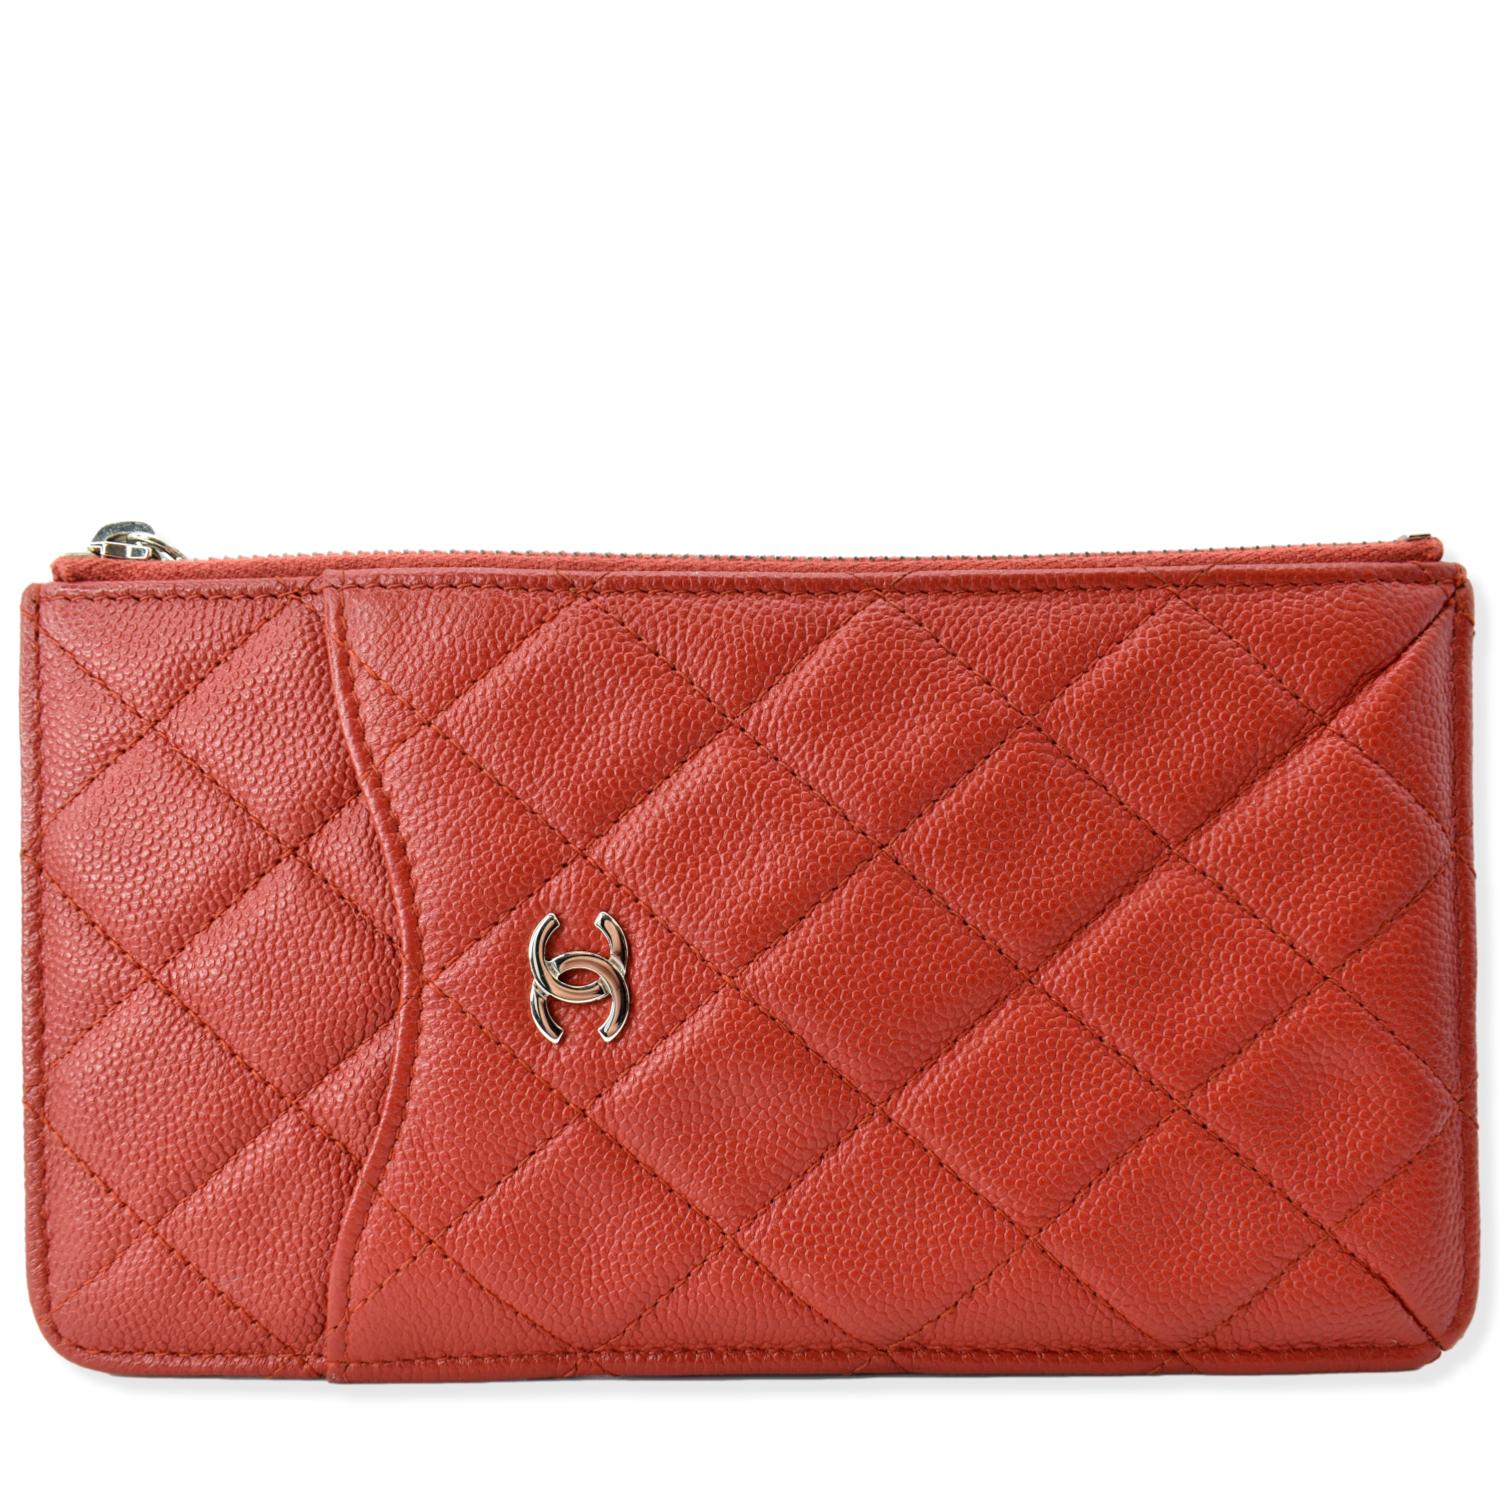 Chanel Small O-Case Leather Pouch